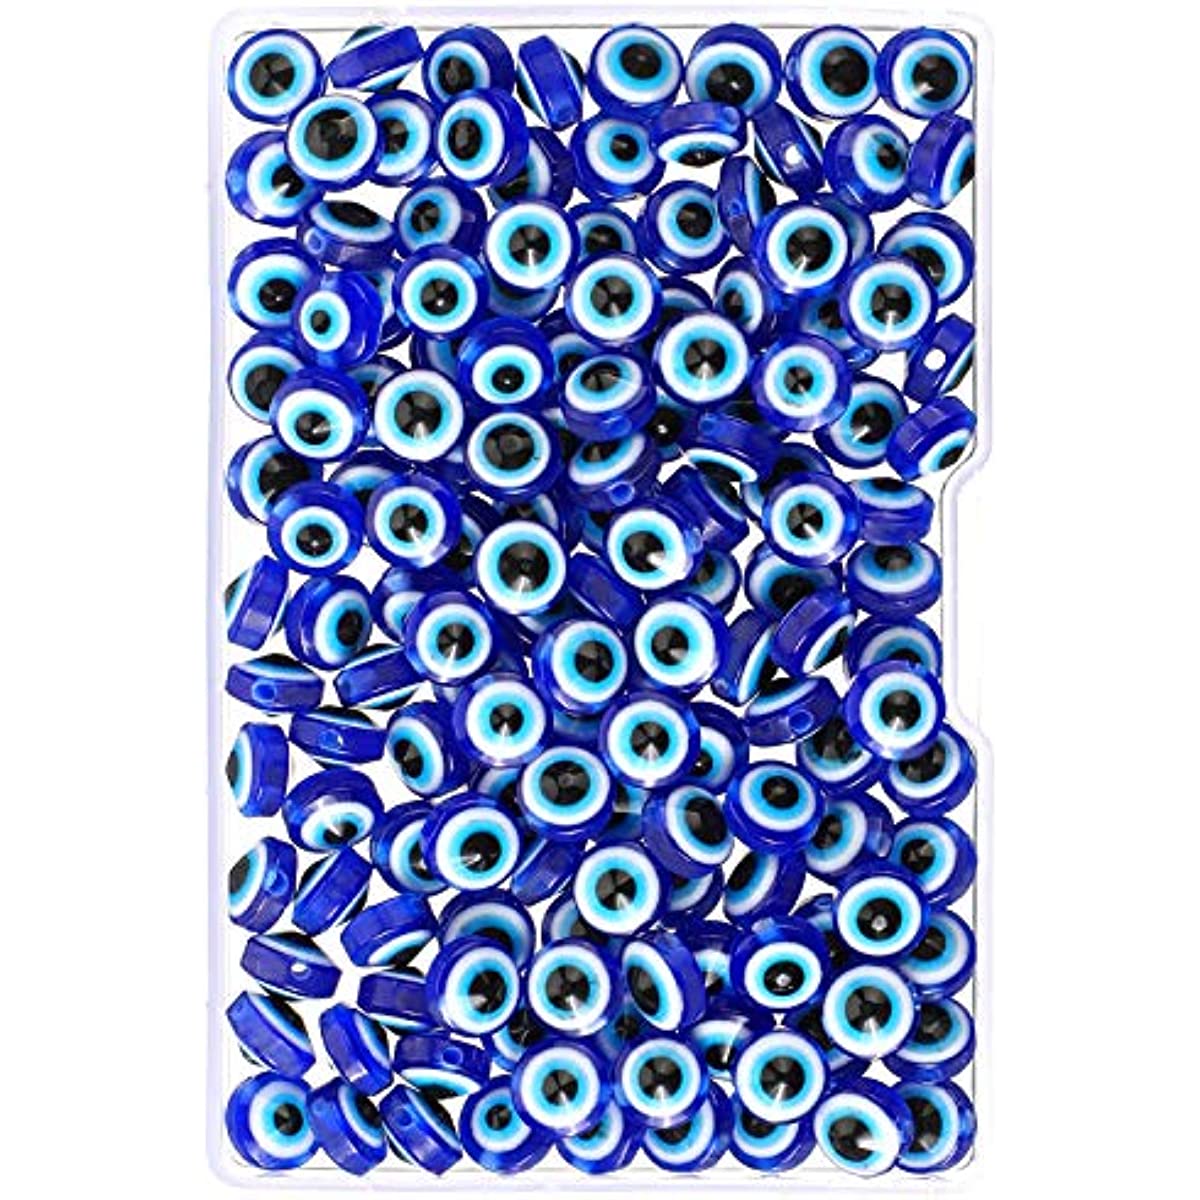 ful Resin Eye Beads Round, Stripe, And Spacer Bands For DIY Evil Eye  Jewelry Making And Bracelet Gifts From Jewelry365, $14.07